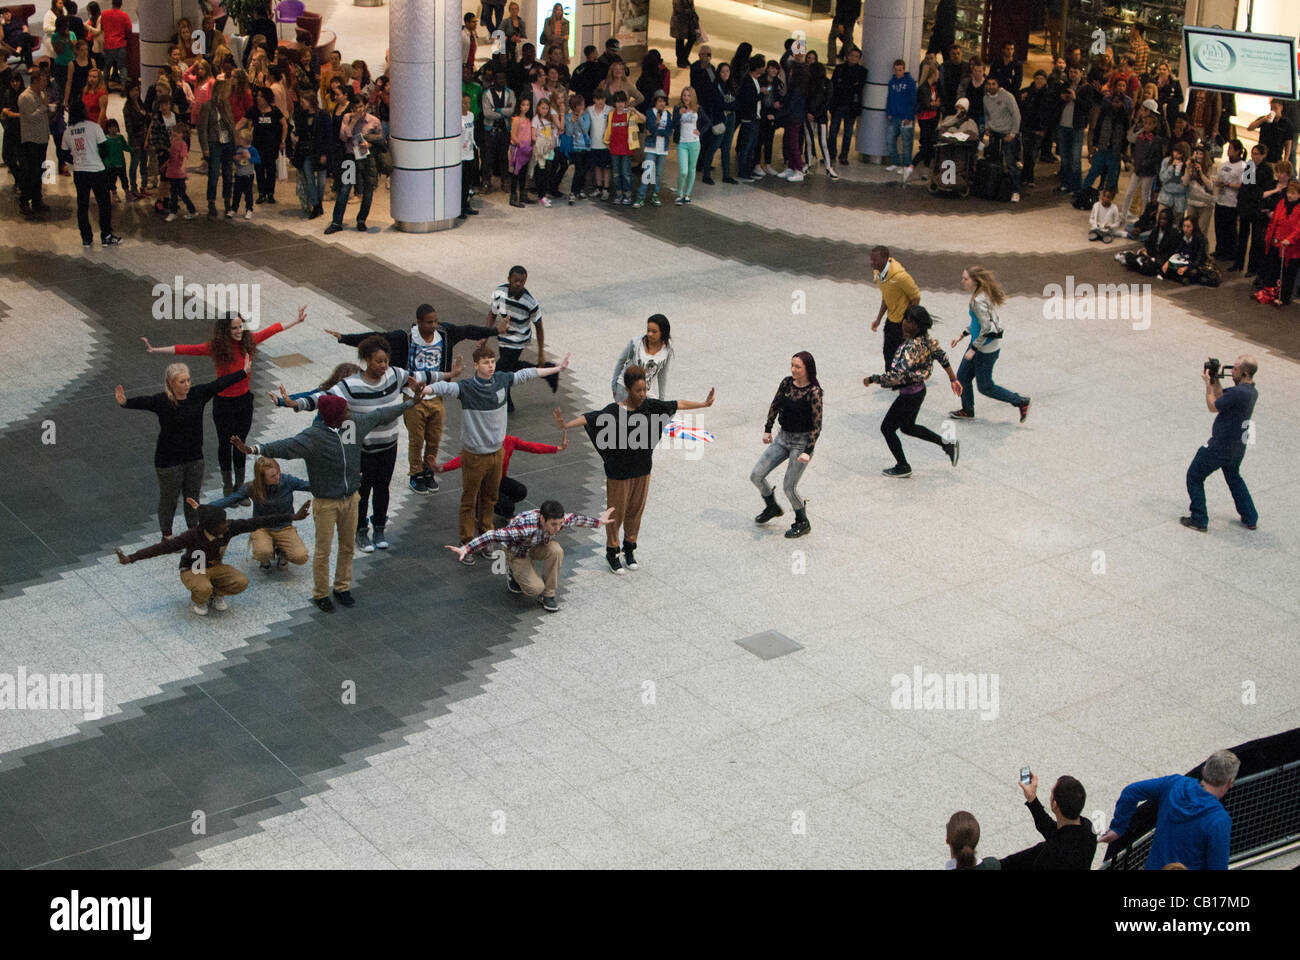 Big Dance doing Flashmob dancing in Westfield White City in London on 18/05/2012 Stock Photo